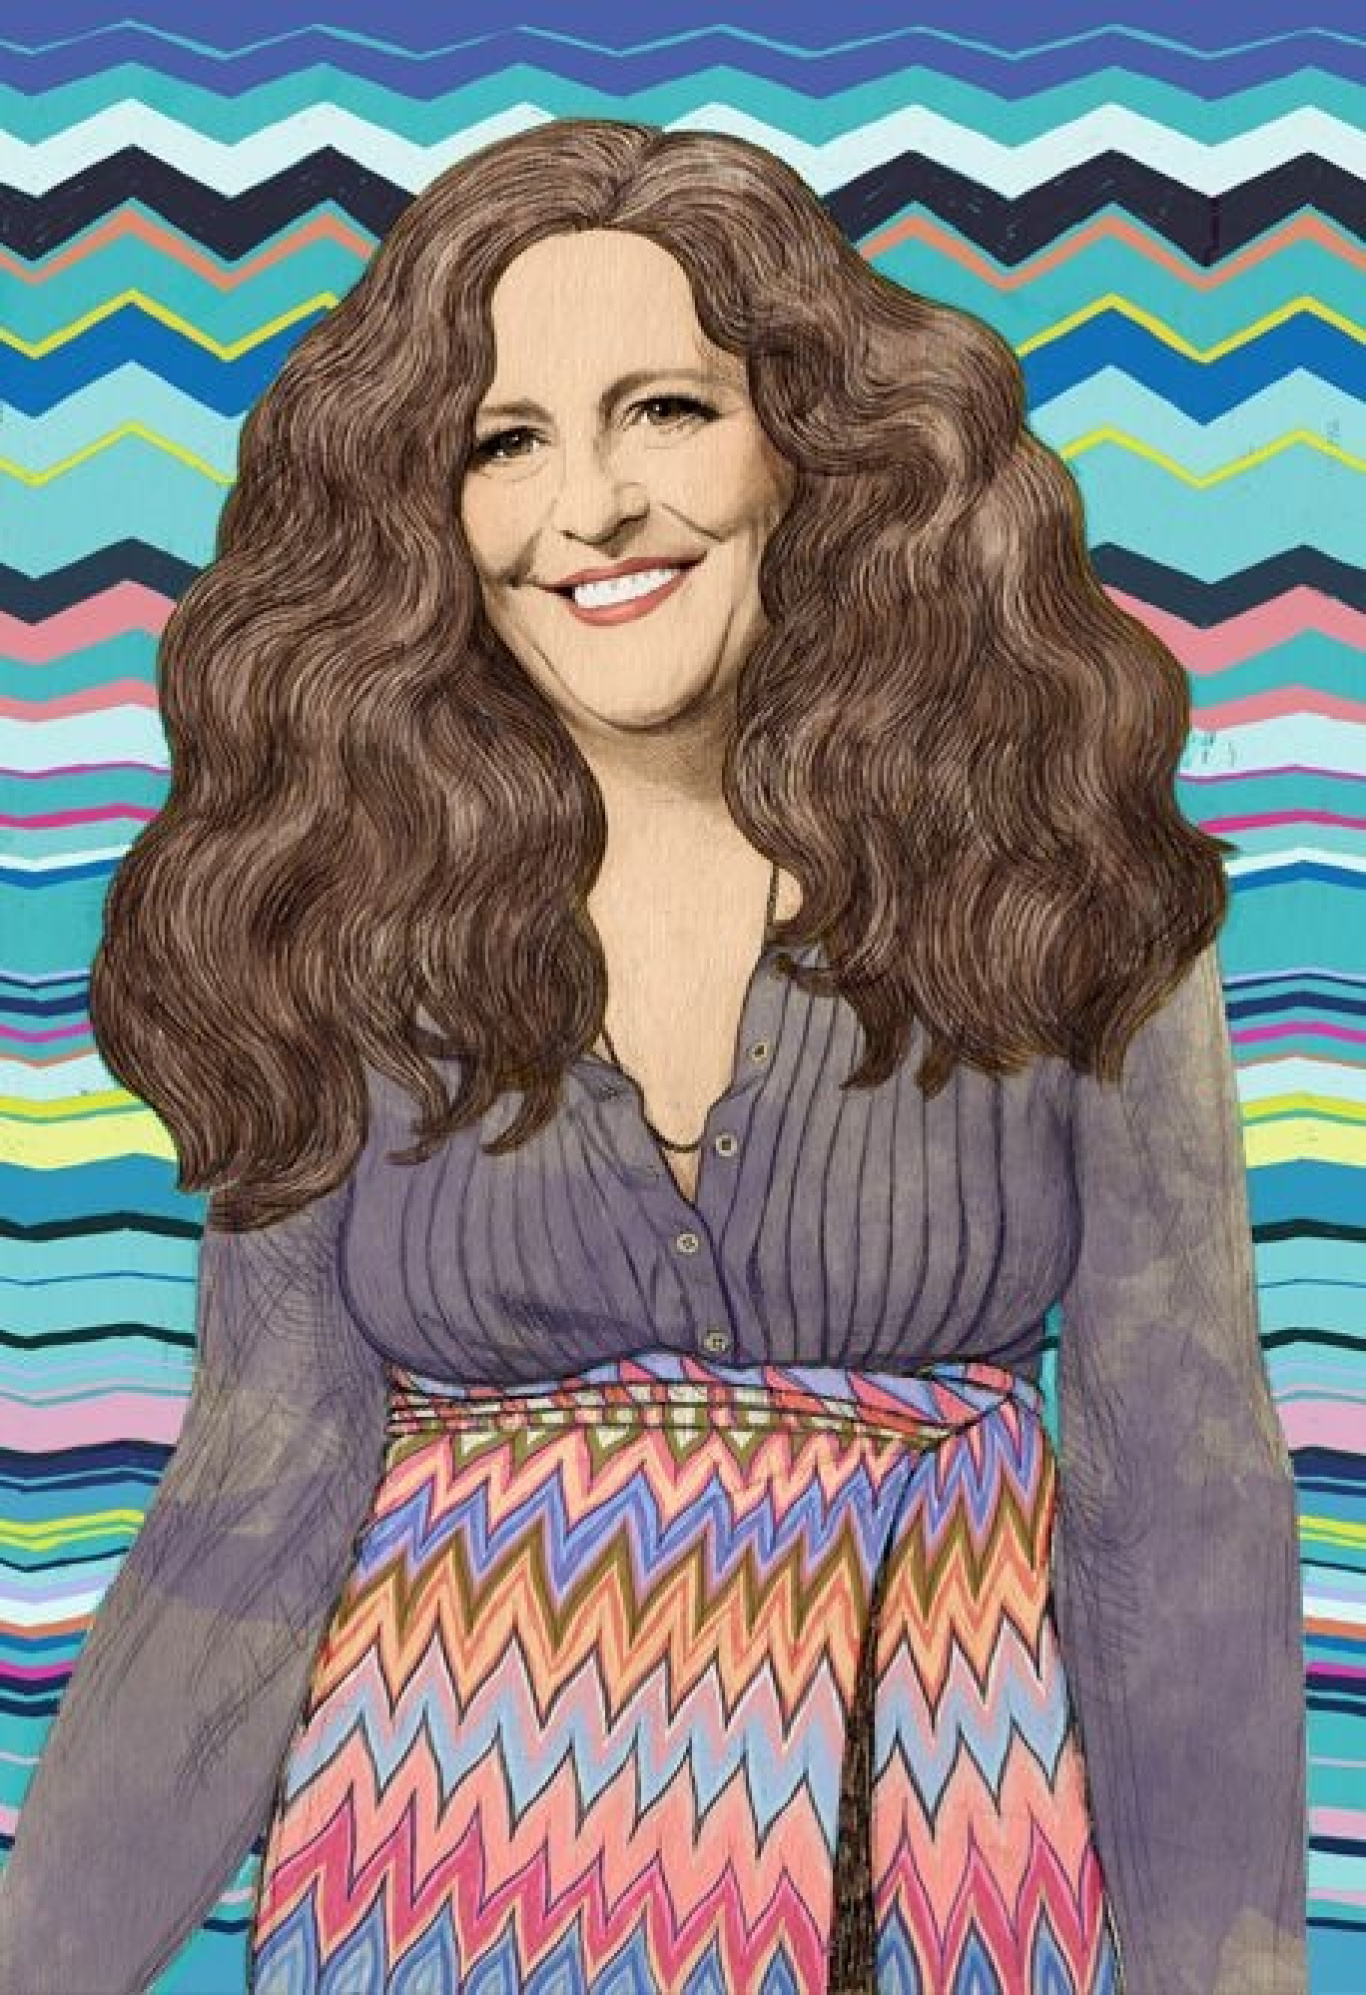 Interview with Angela Missoni - Illustration by Anna Higgie